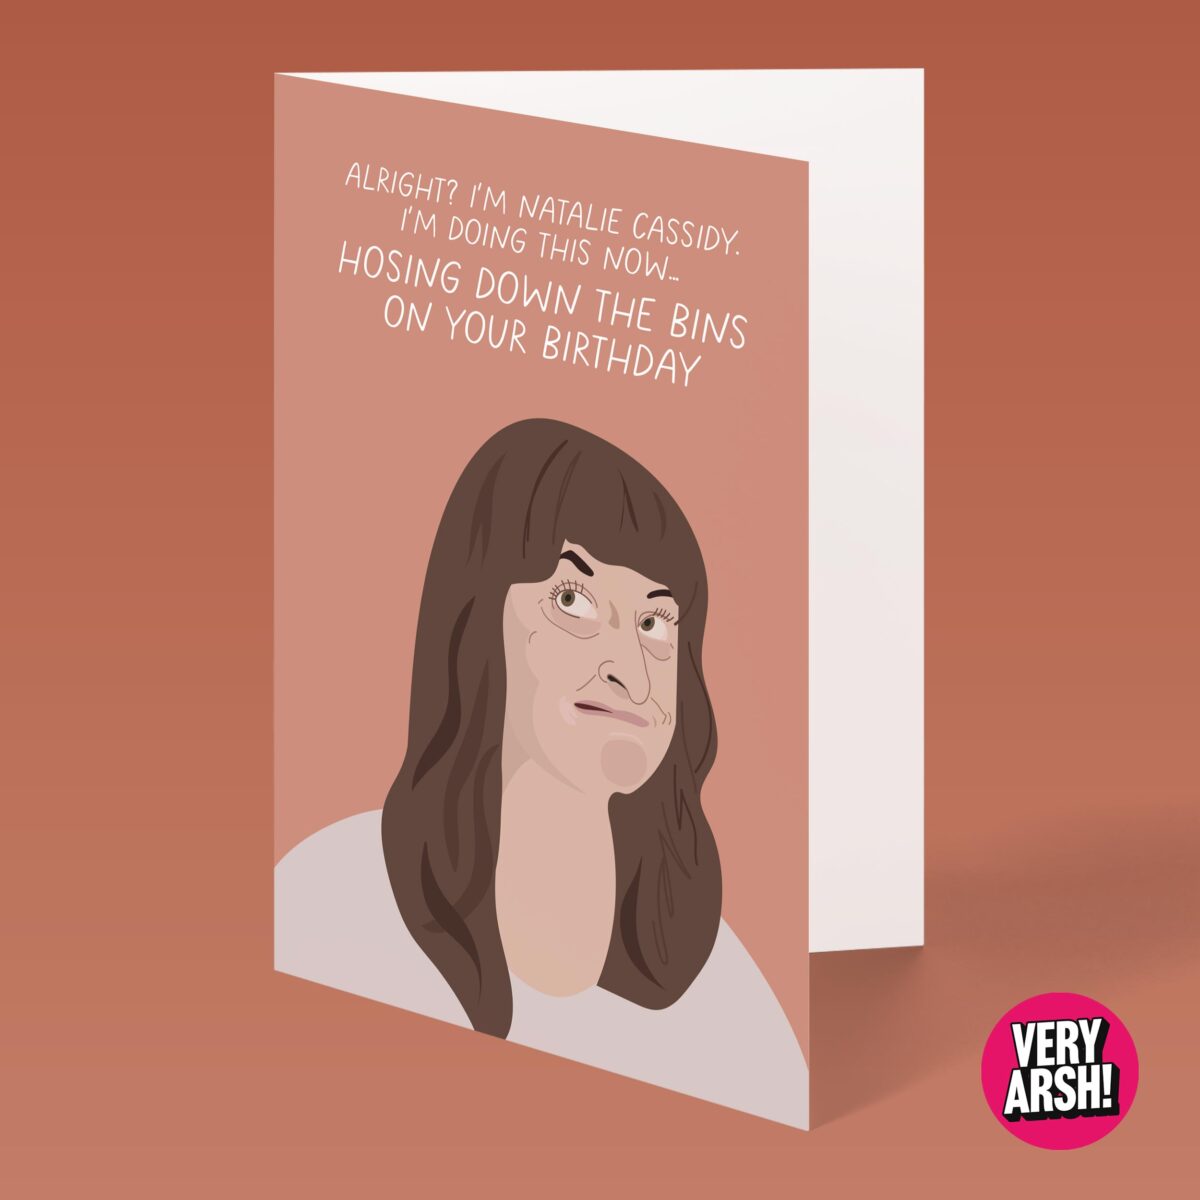 Hosing the Bins - Morgana is Natalie Cassidy from Eastenders inspired Birthday Card, Greeting Card